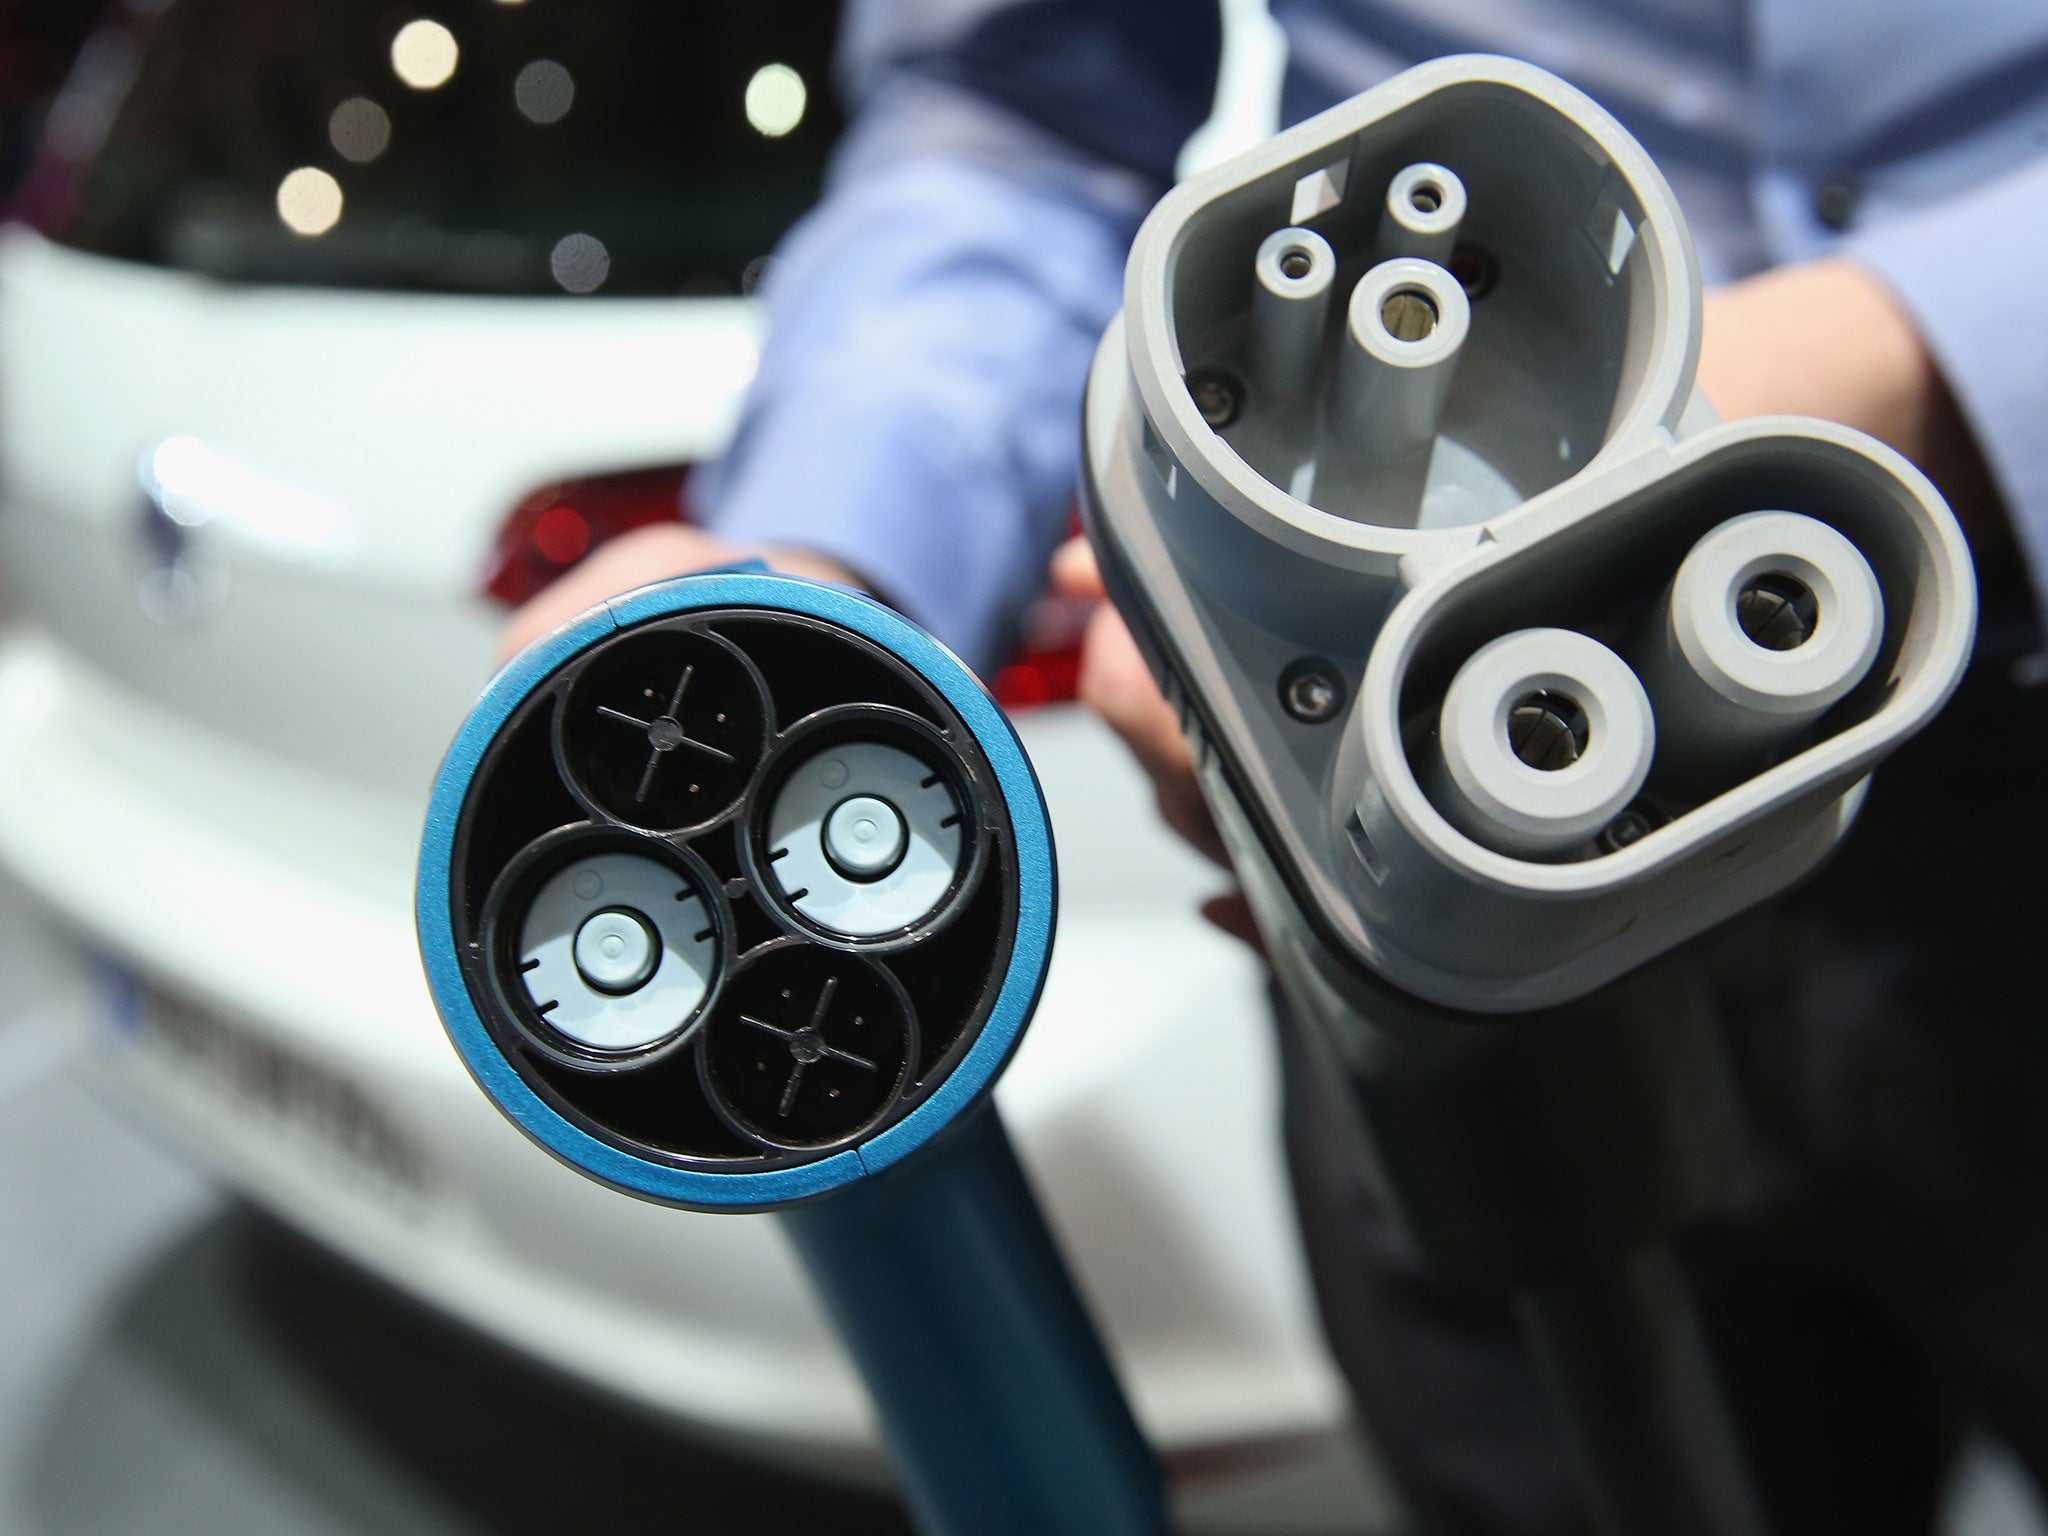 Sales of electric cars accounted for 17.6 per cent of new vehicle registrations in January and hybrid cars accounted for 33.8 per cent, for a combined 51.4 per cent